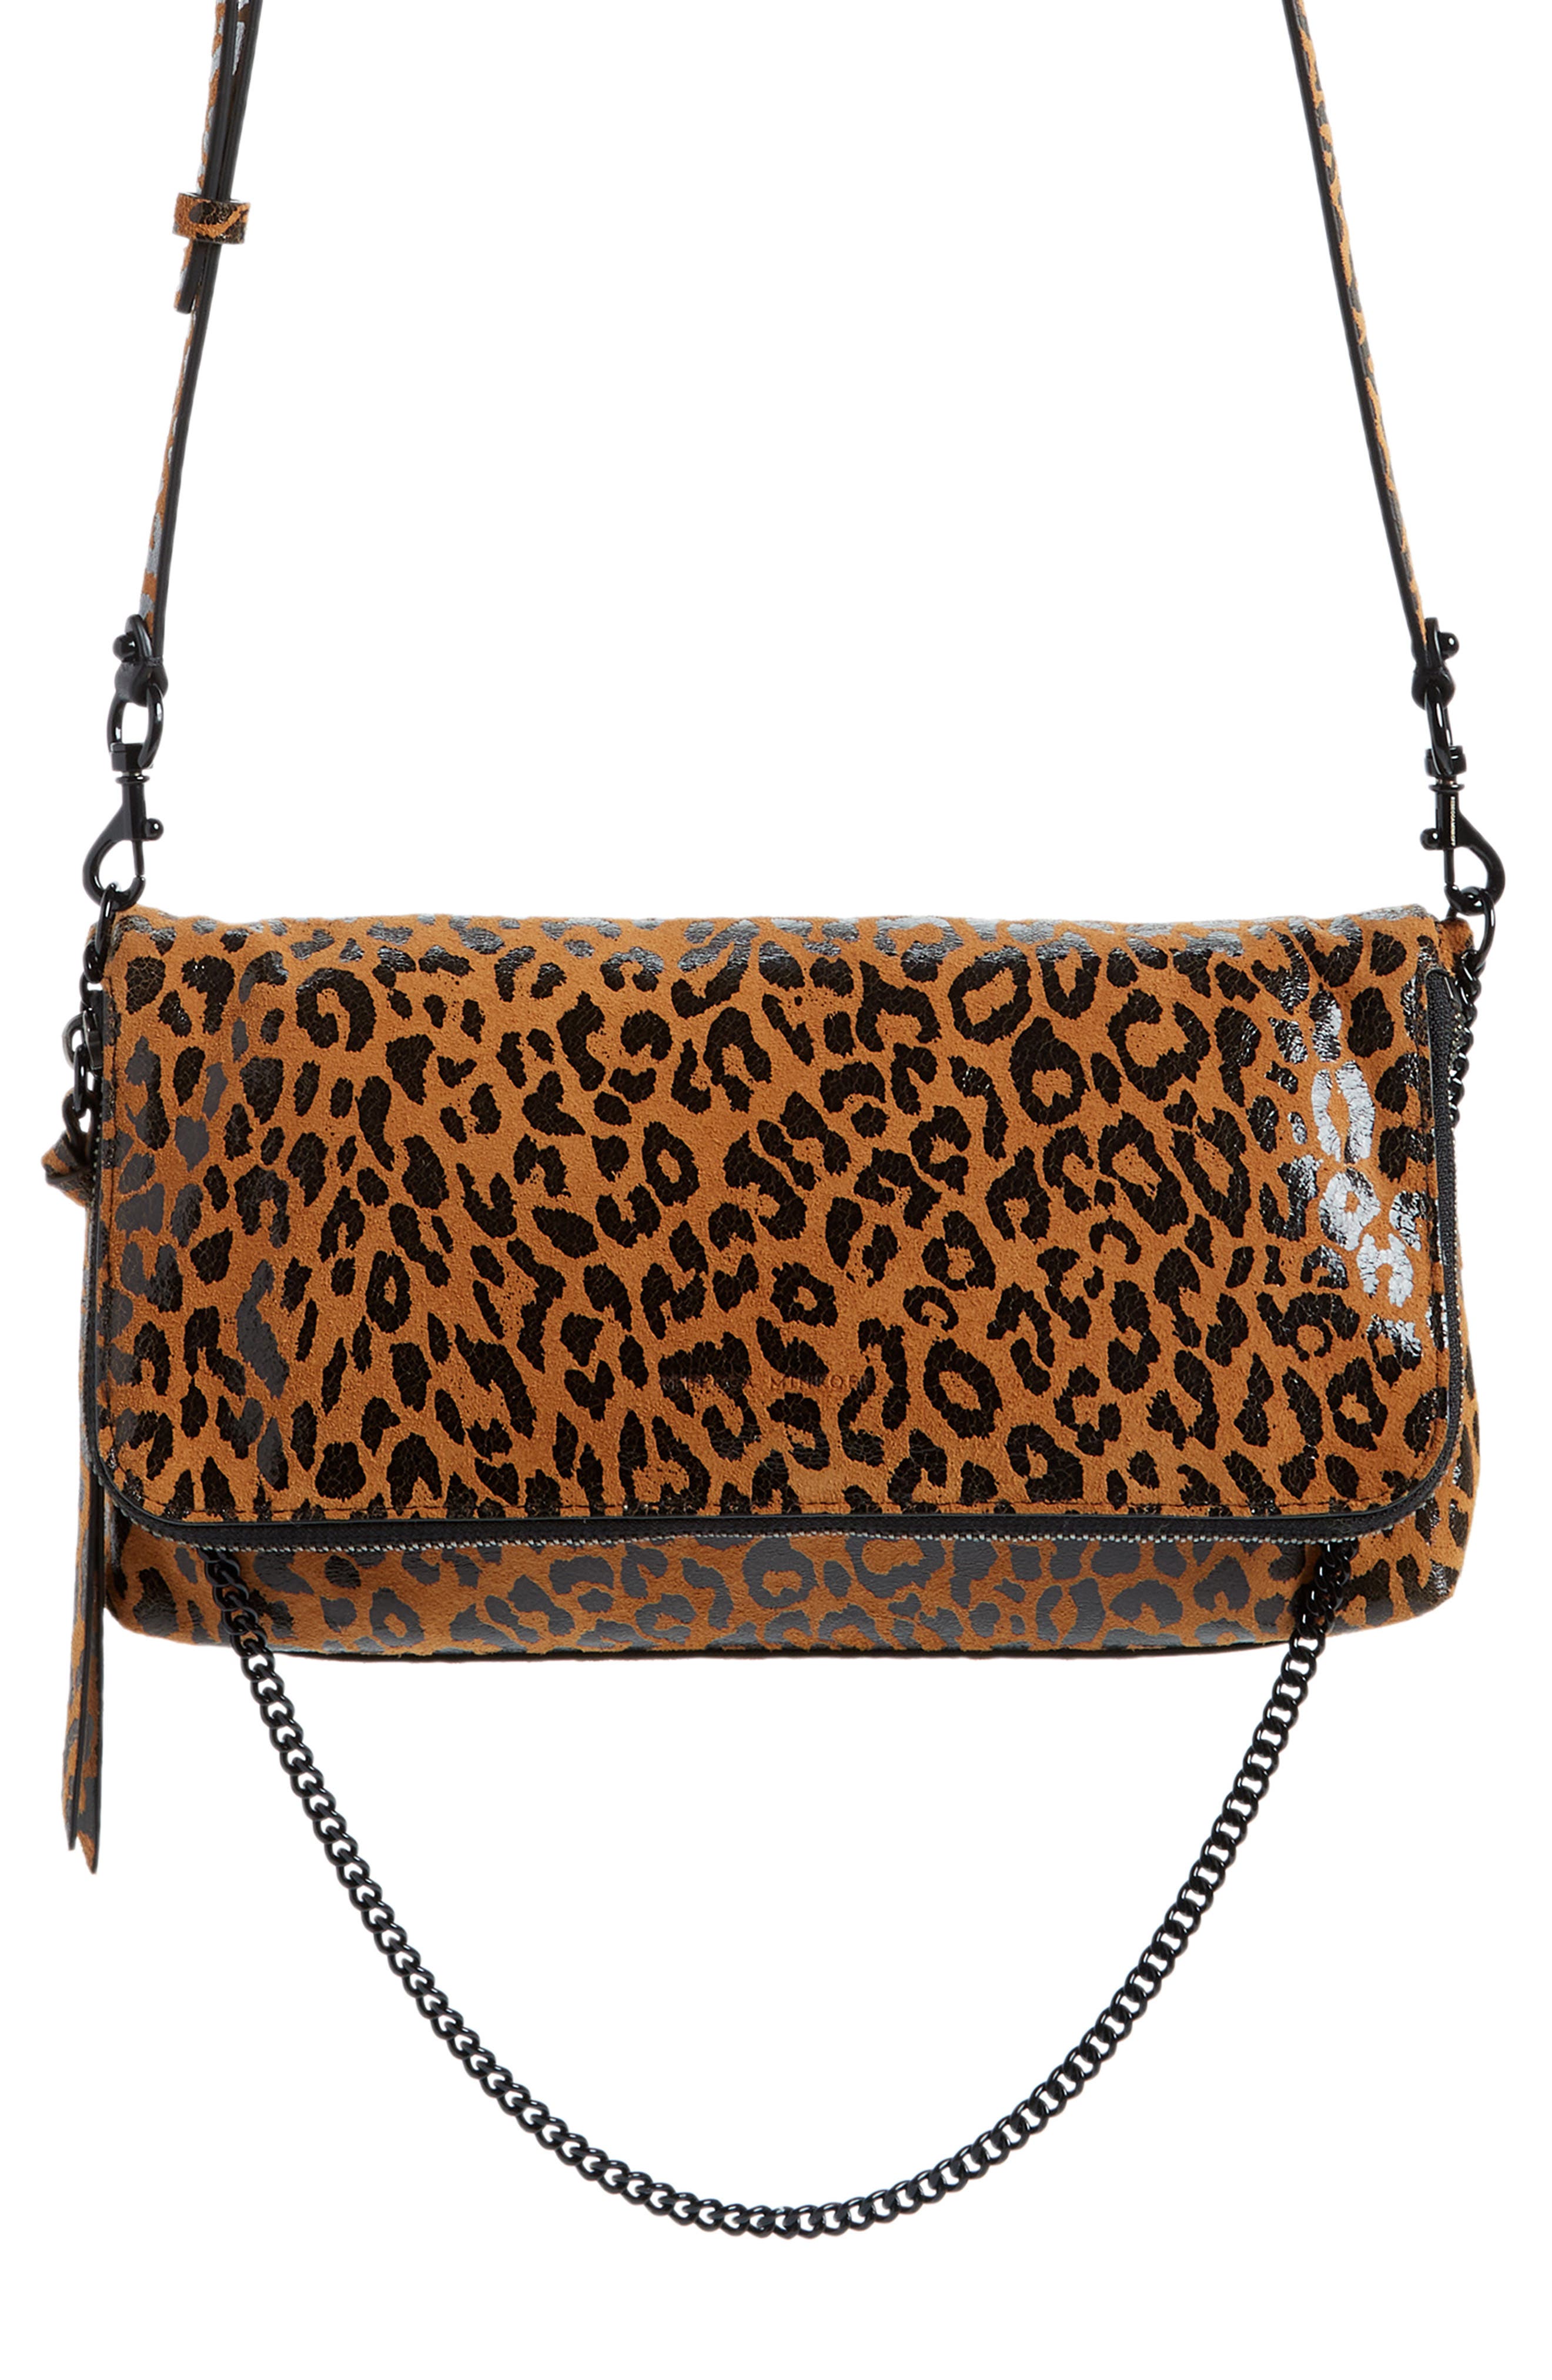 Rebecca Minkoff Date Leather Convertible Crossbody Bag in Leopard at Nordstrom